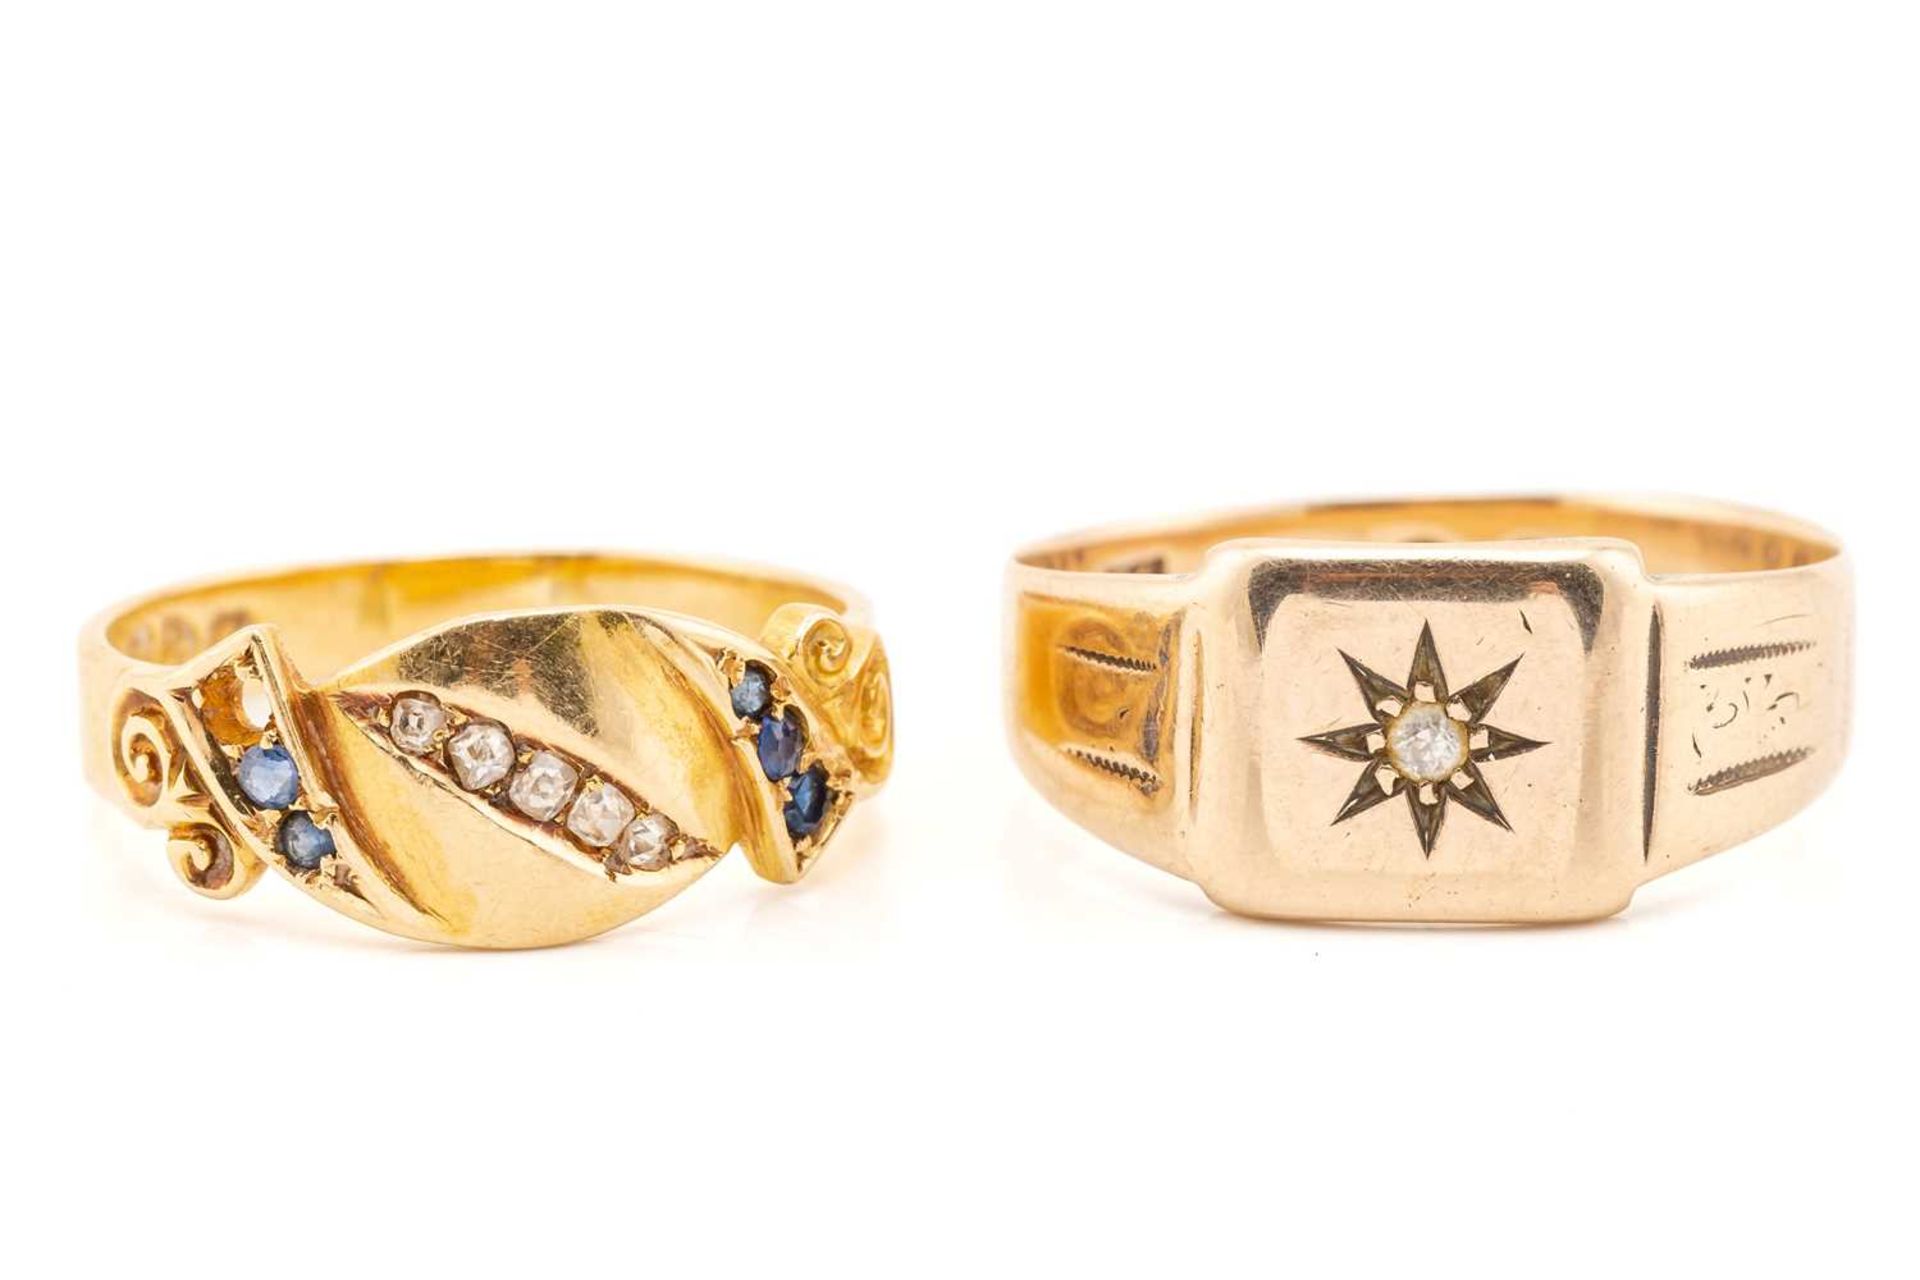 An Edwardian gem-set dress ring in 18ct gold and a diamond-set signet ring; the first ring comprises